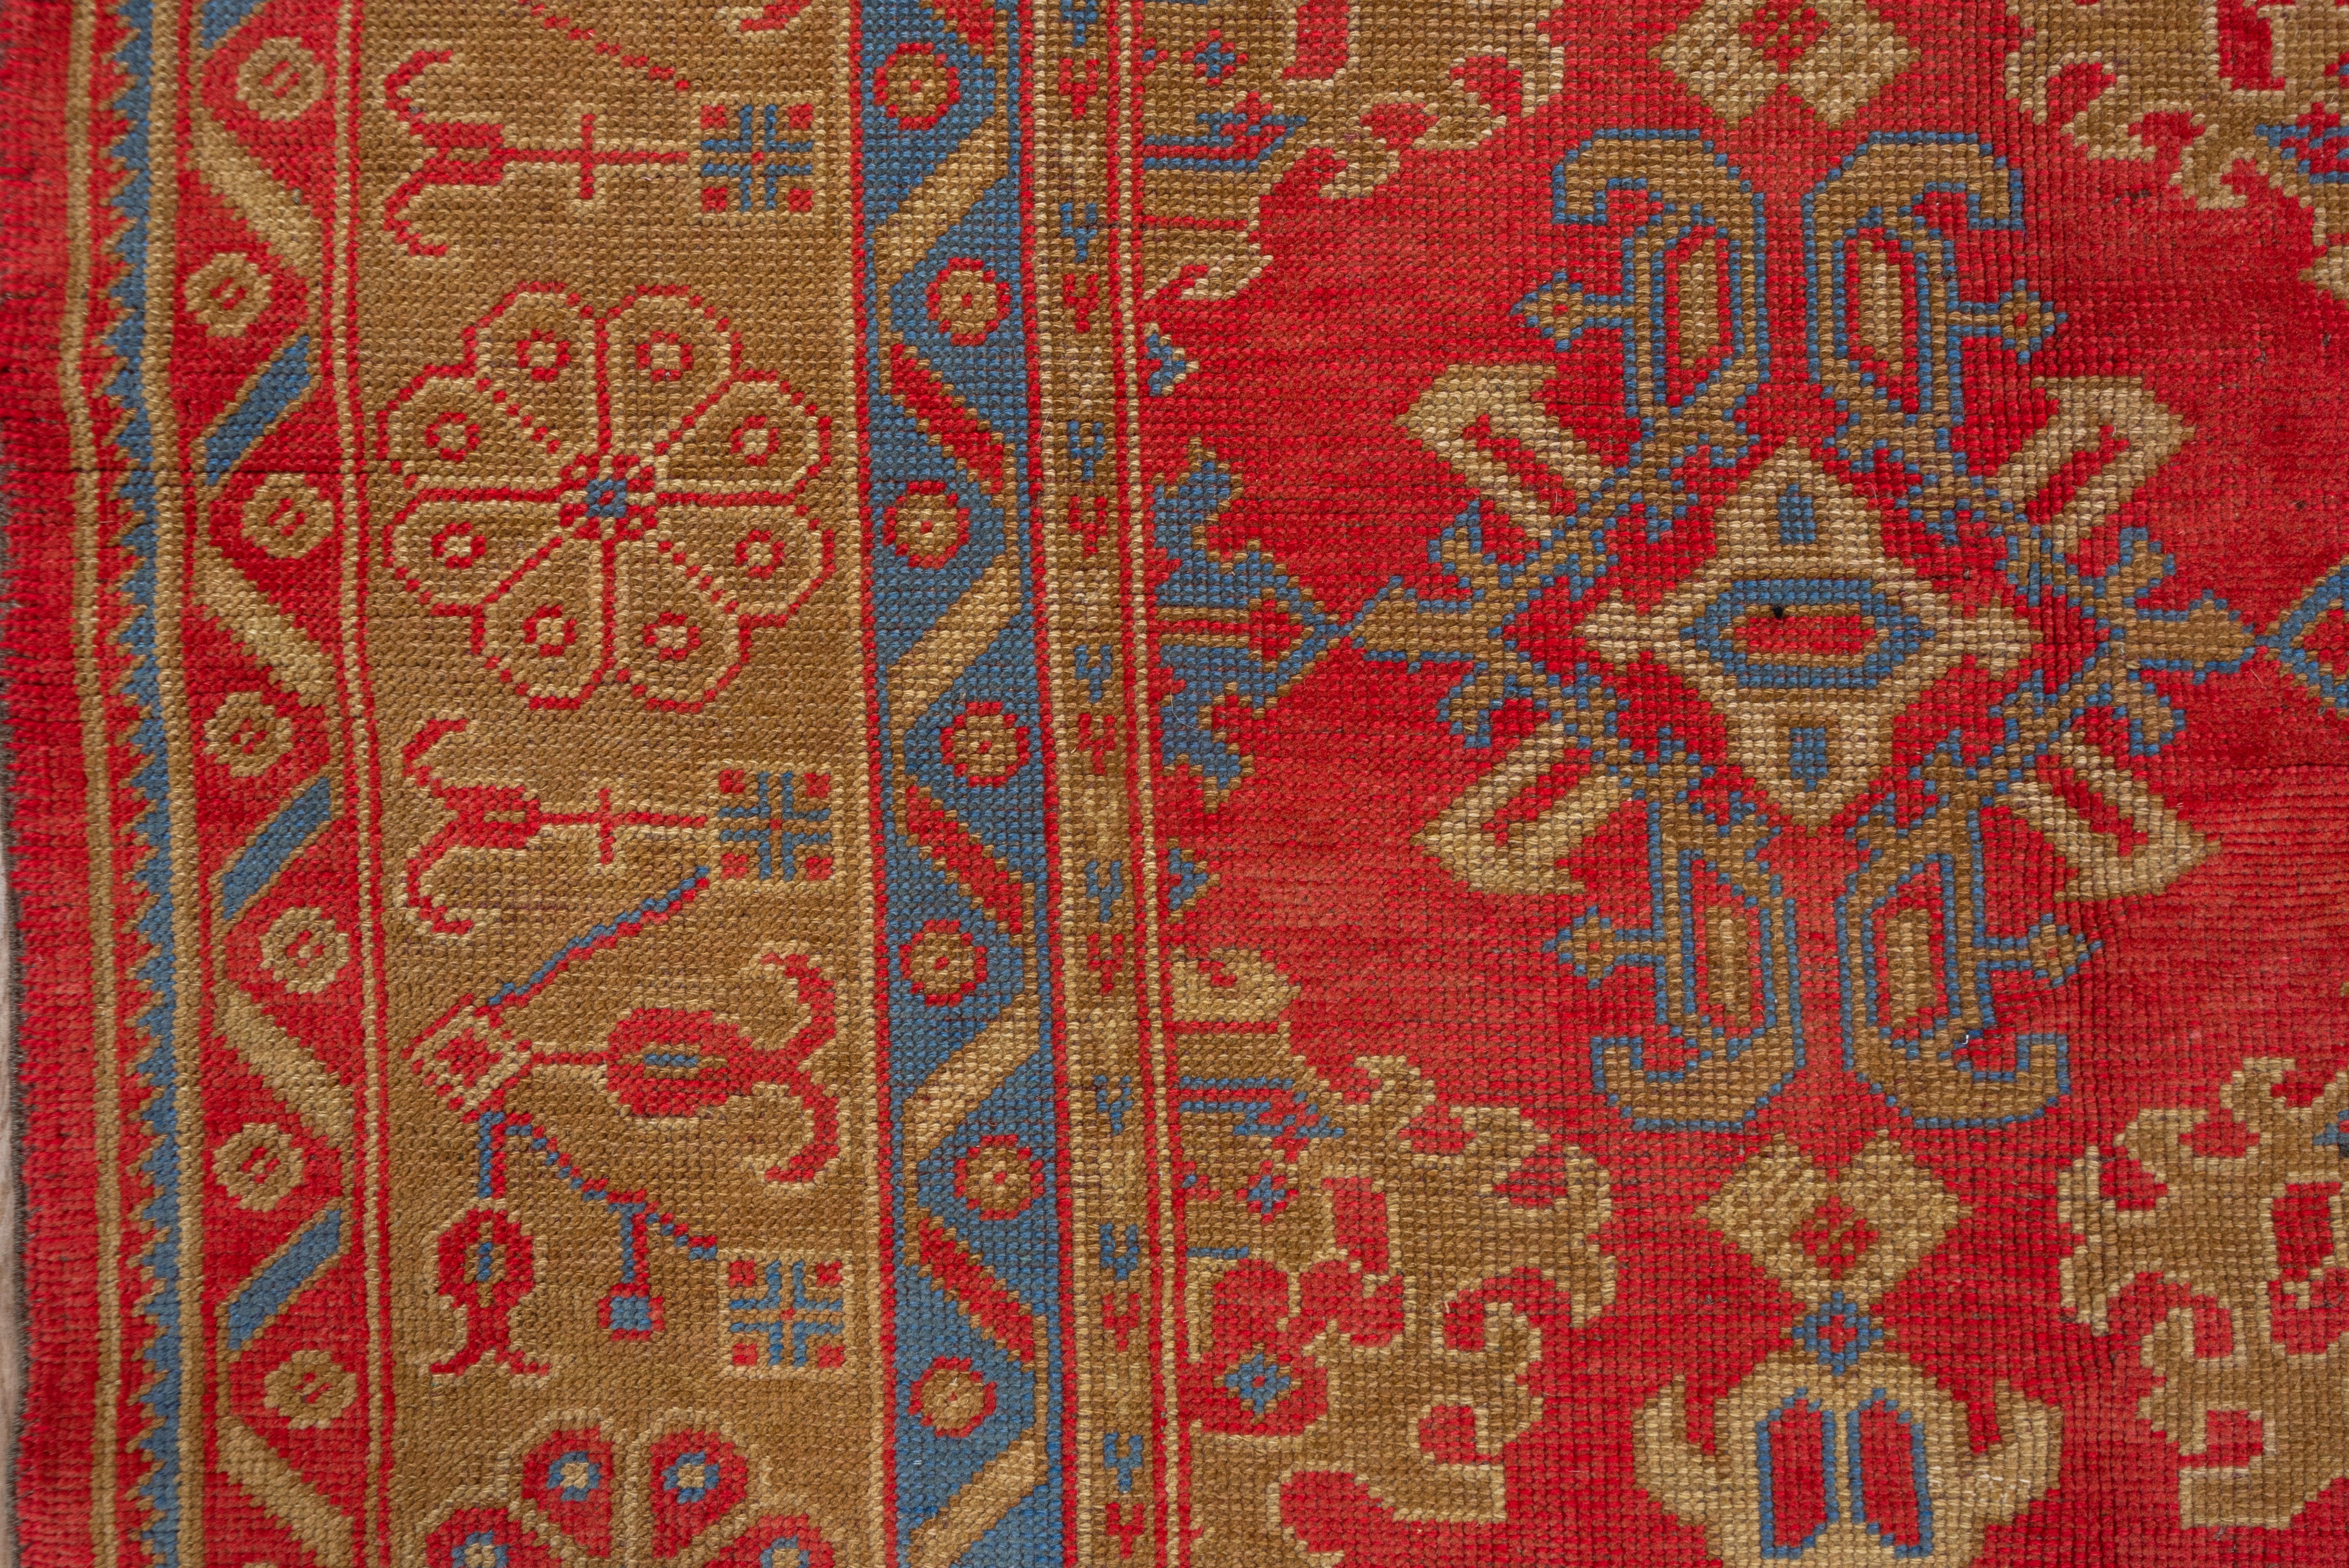 This superbly colored west Anatolian city carpet shows five full columns with elaborate ragged palmette and yaprak (leaf) designs on a brilliant madder red field and accented in a crisp cerulean blue. and beautiful teal. Green, blue & red borders